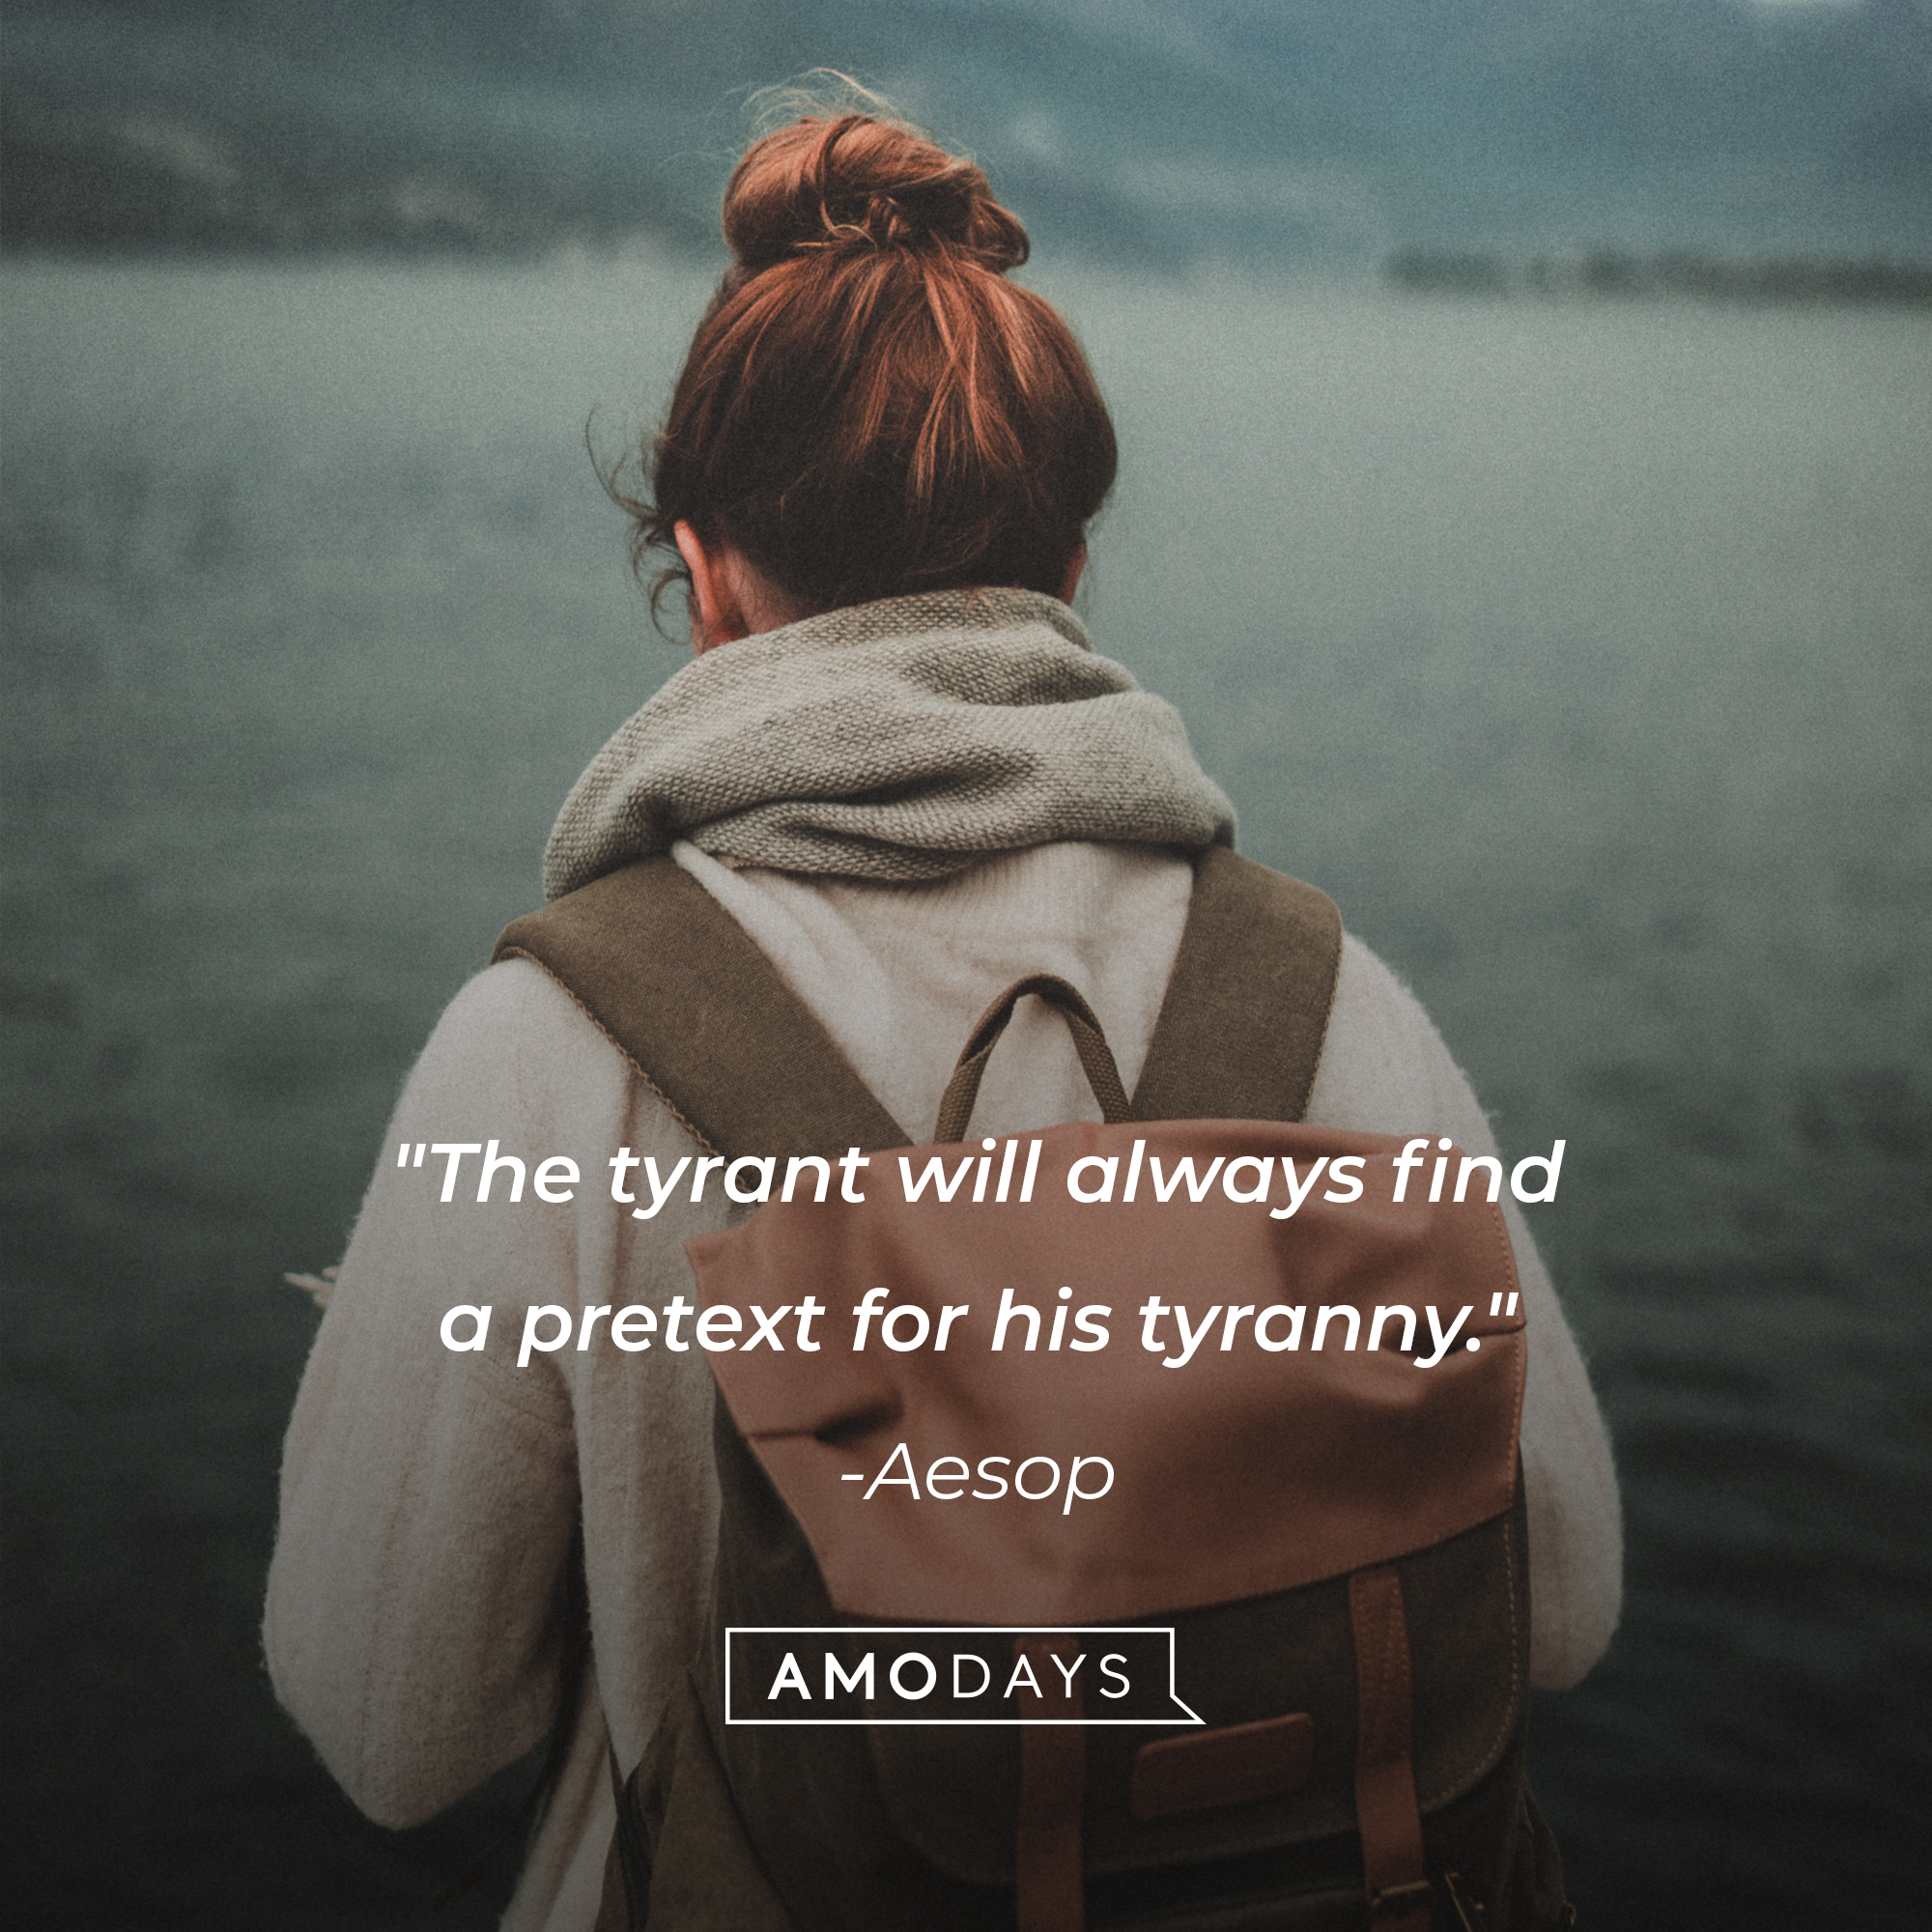 Aesop's quote: "The tyrant will always find a pretext for his tyranny." | Image: AmoDays